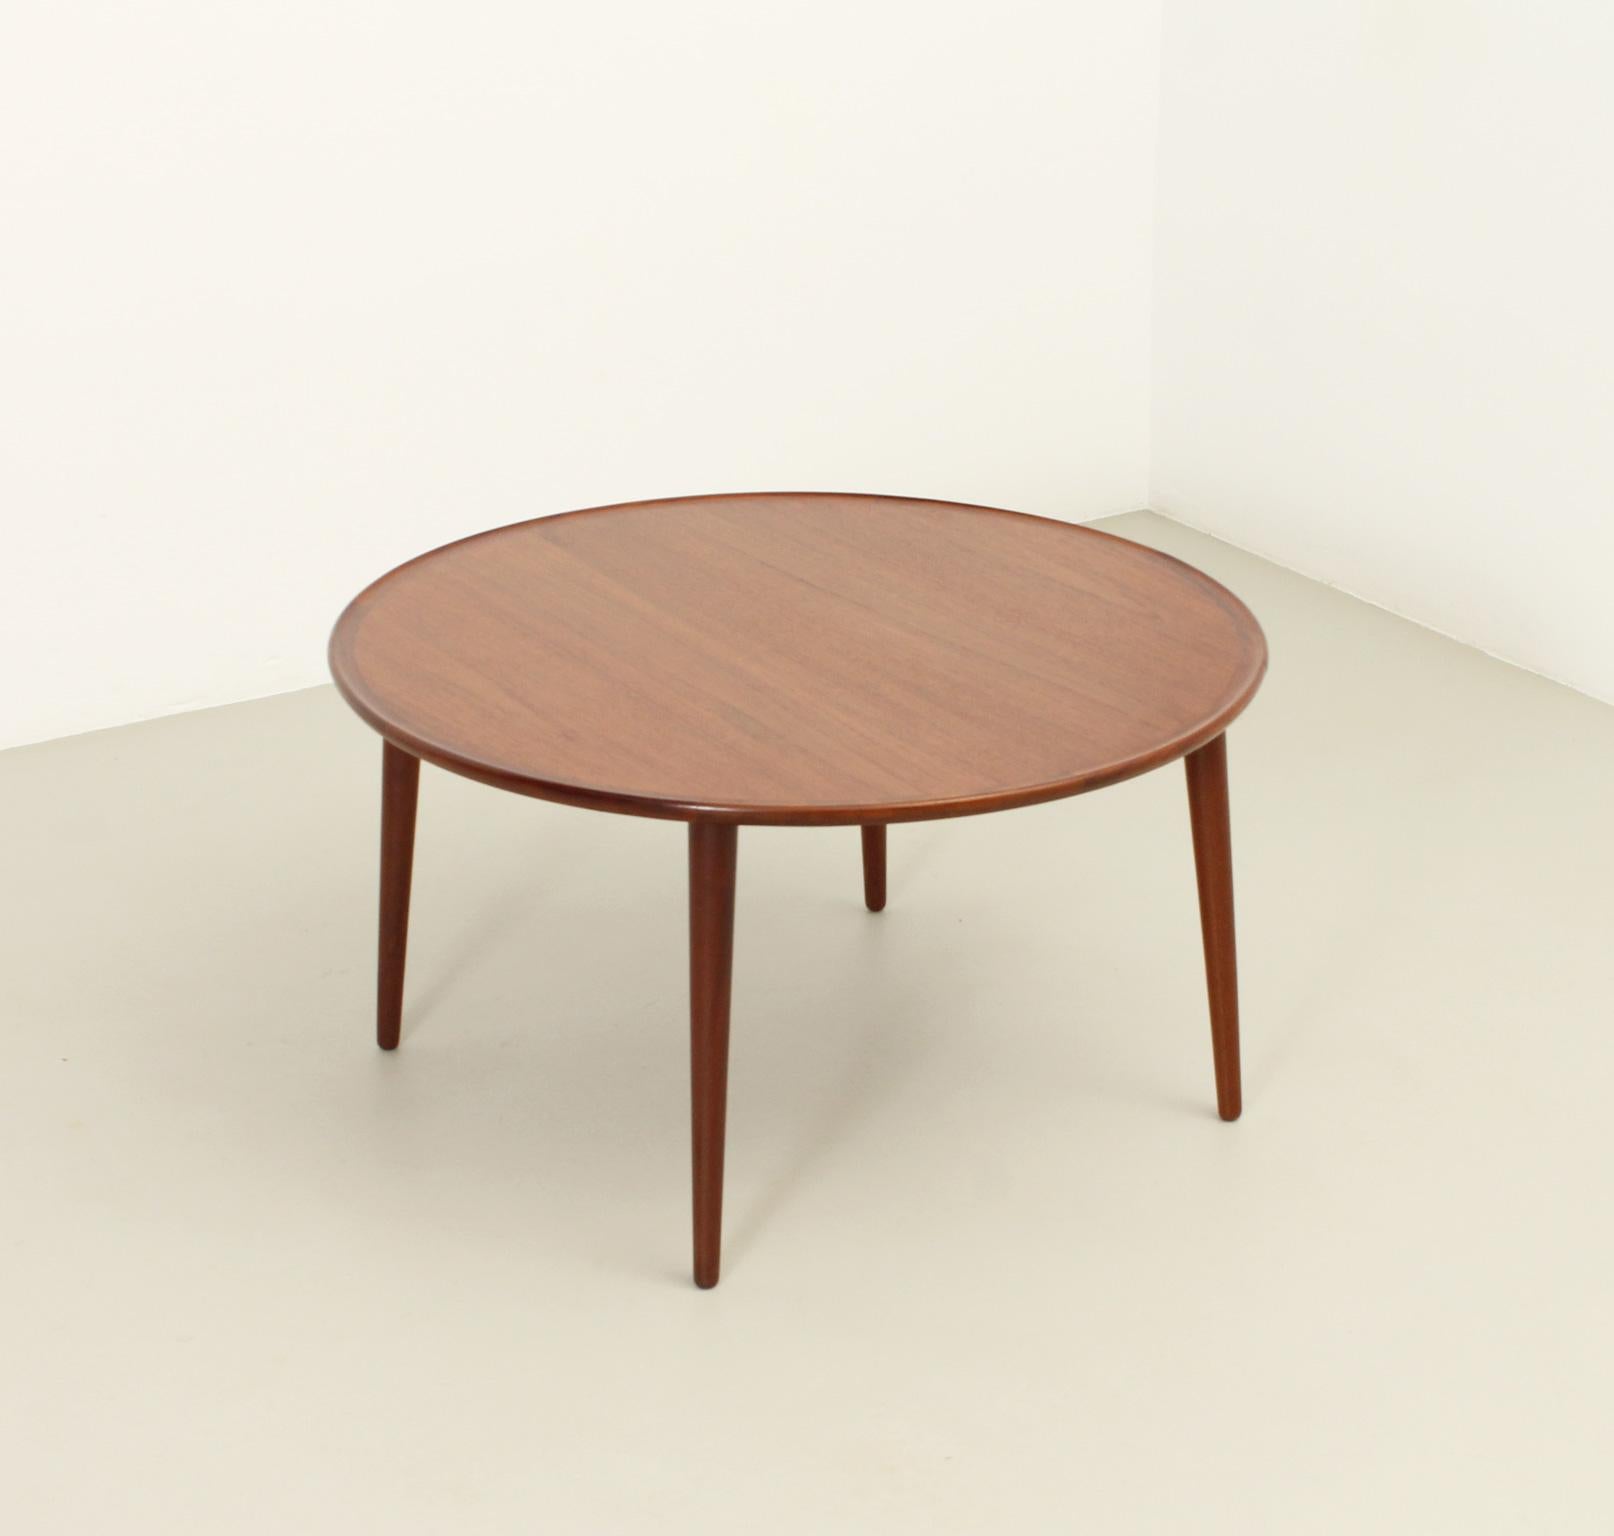 Scandinavian Modern Round Coffee Table in Teak Wood by BC Møbler, Denmark, 1960's For Sale